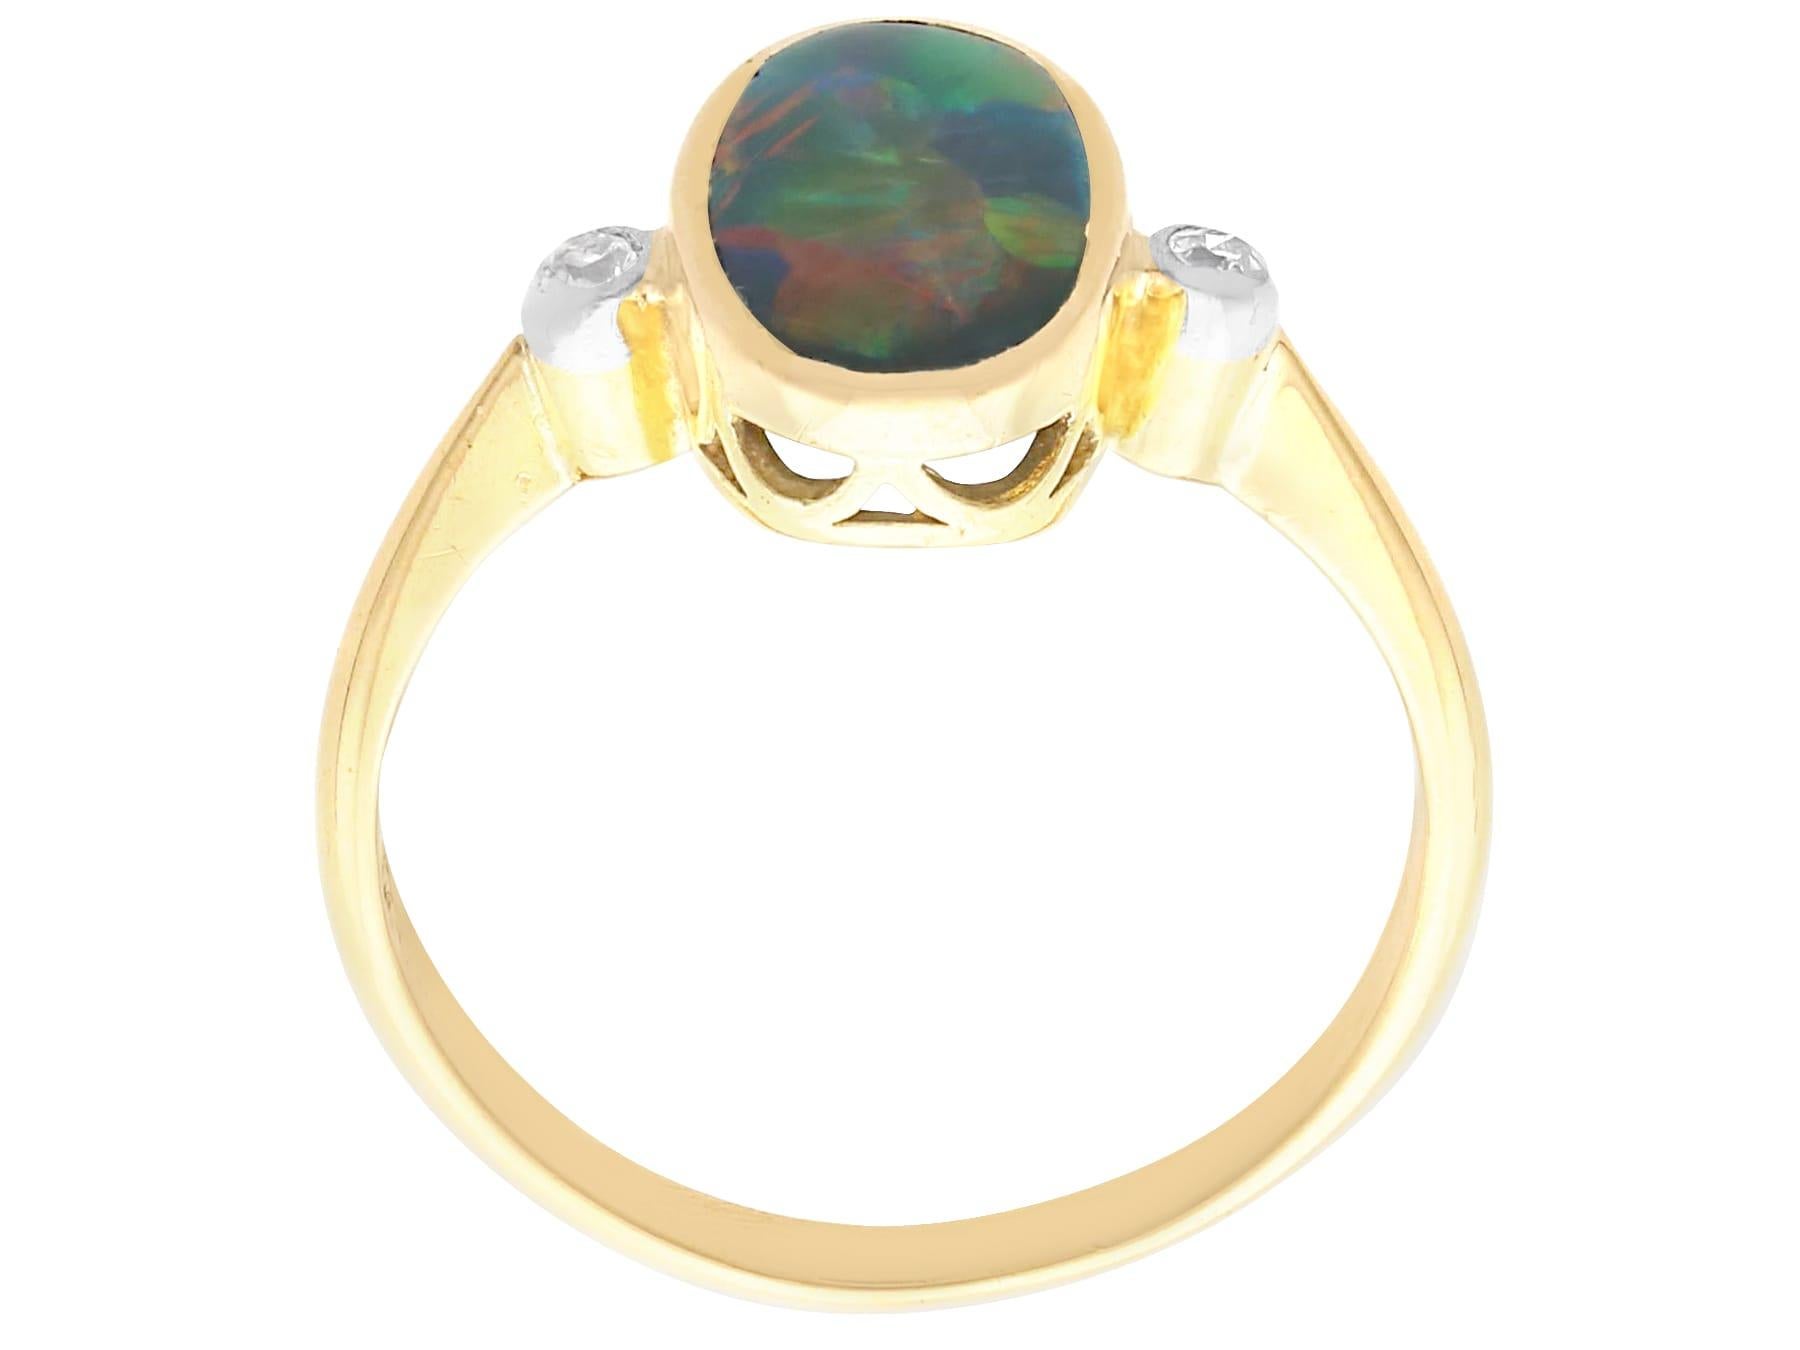 Women's or Men's Antique 1.35ct Black Opal and Diamond Cocktail Ring in 18ct Yellow Gold